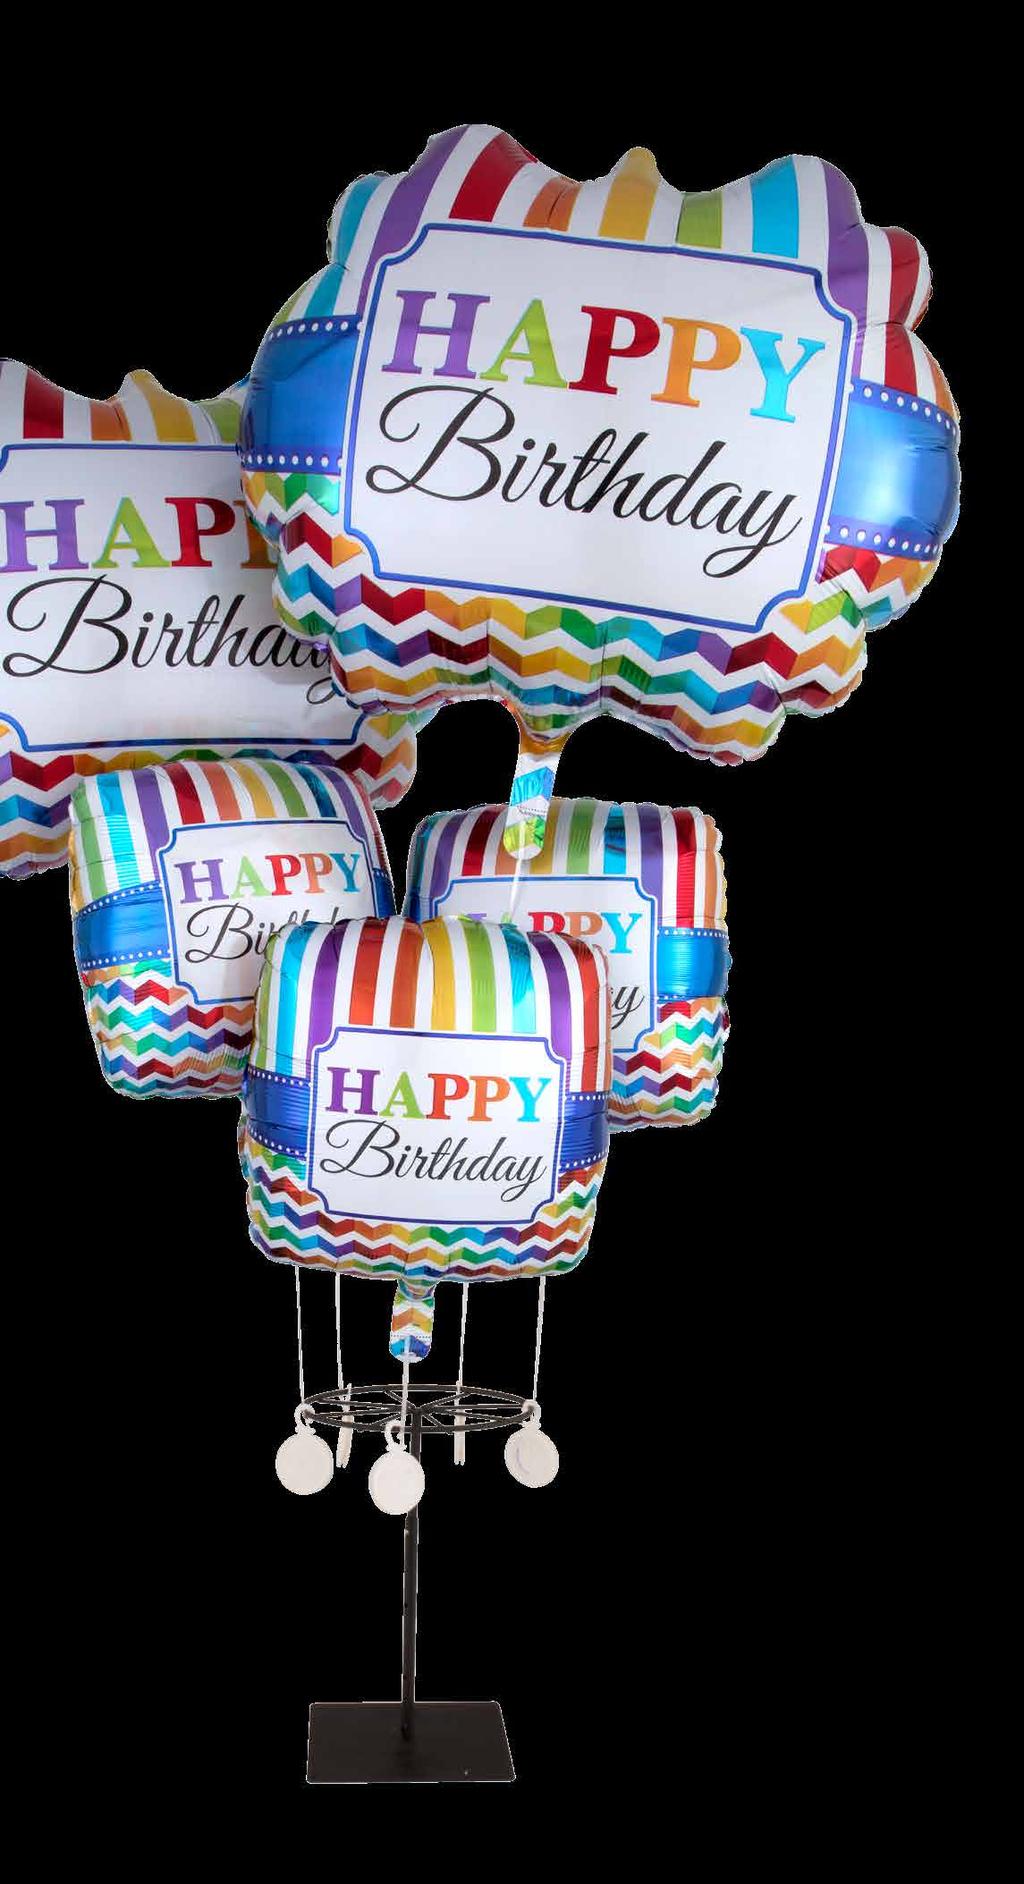 halo The Halo merchandiser is effective for displaying a number of balloons in a small